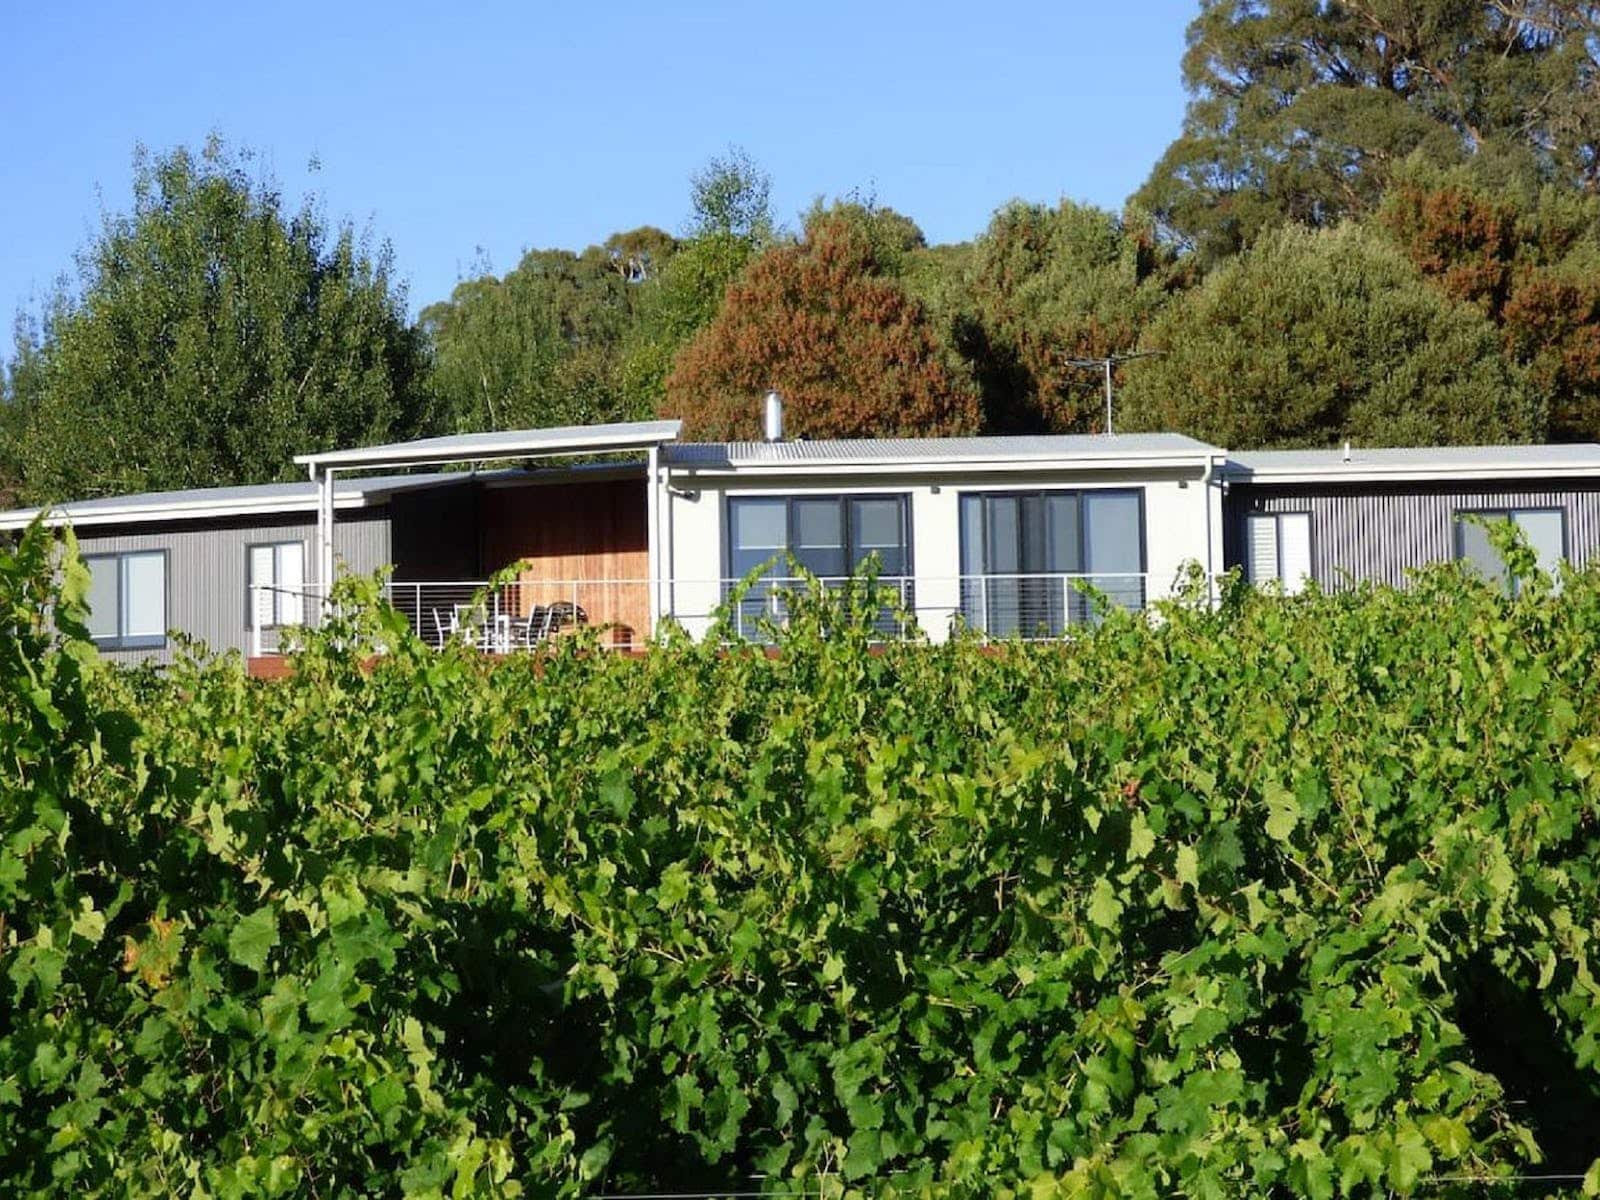 lush green grapevines in the foreground and with accommodation behind